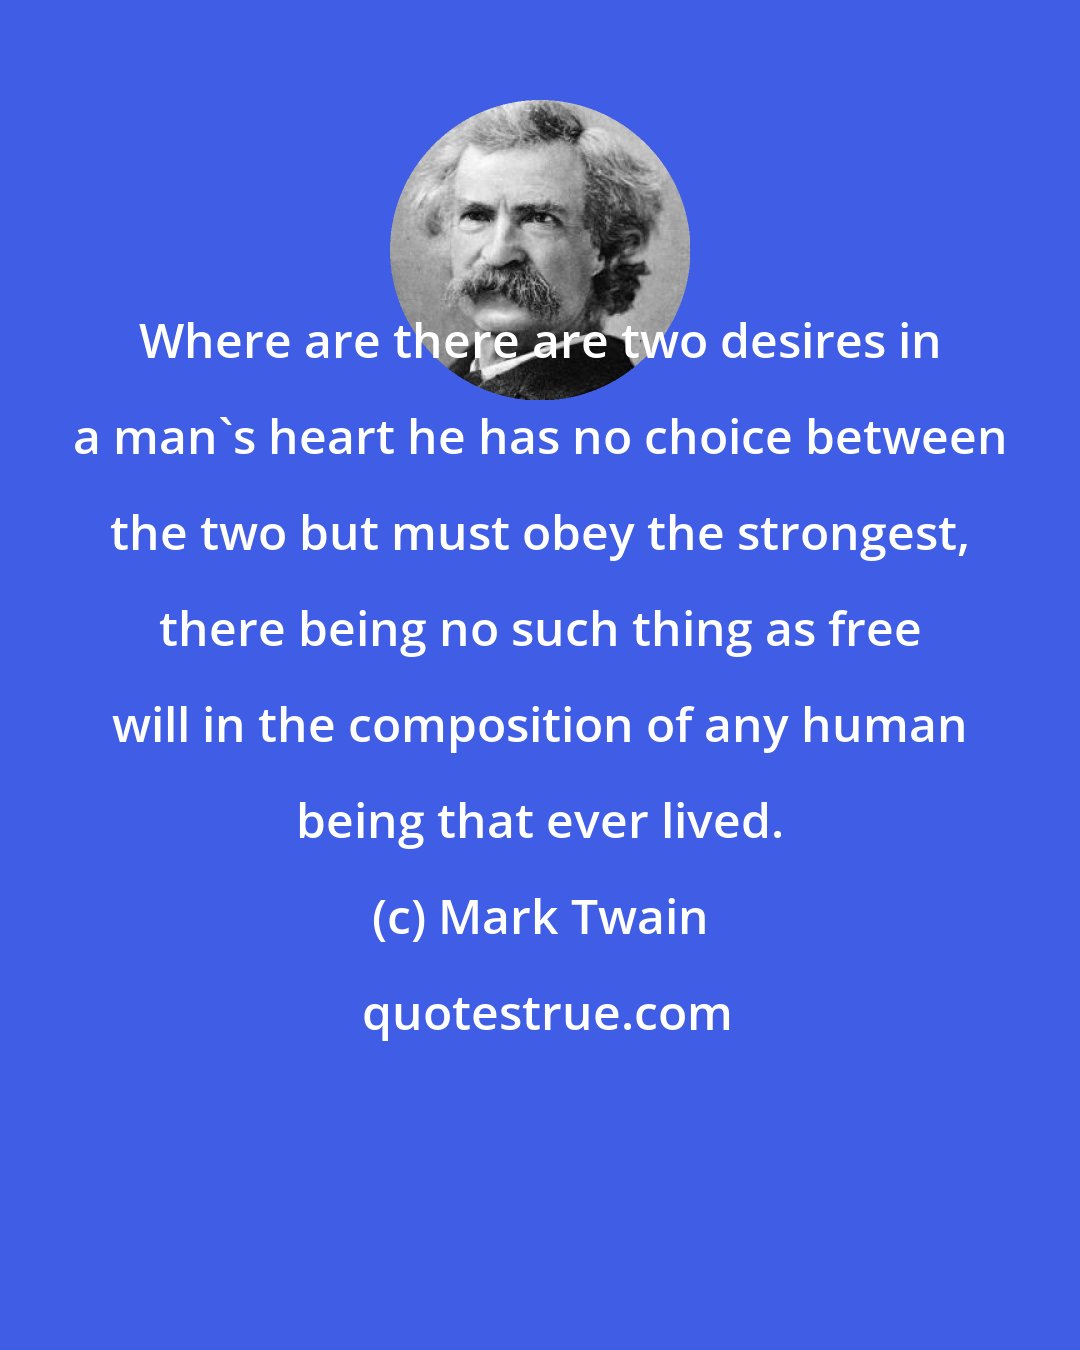 Mark Twain: Where are there are two desires in a man's heart he has no choice between the two but must obey the strongest, there being no such thing as free will in the composition of any human being that ever lived.